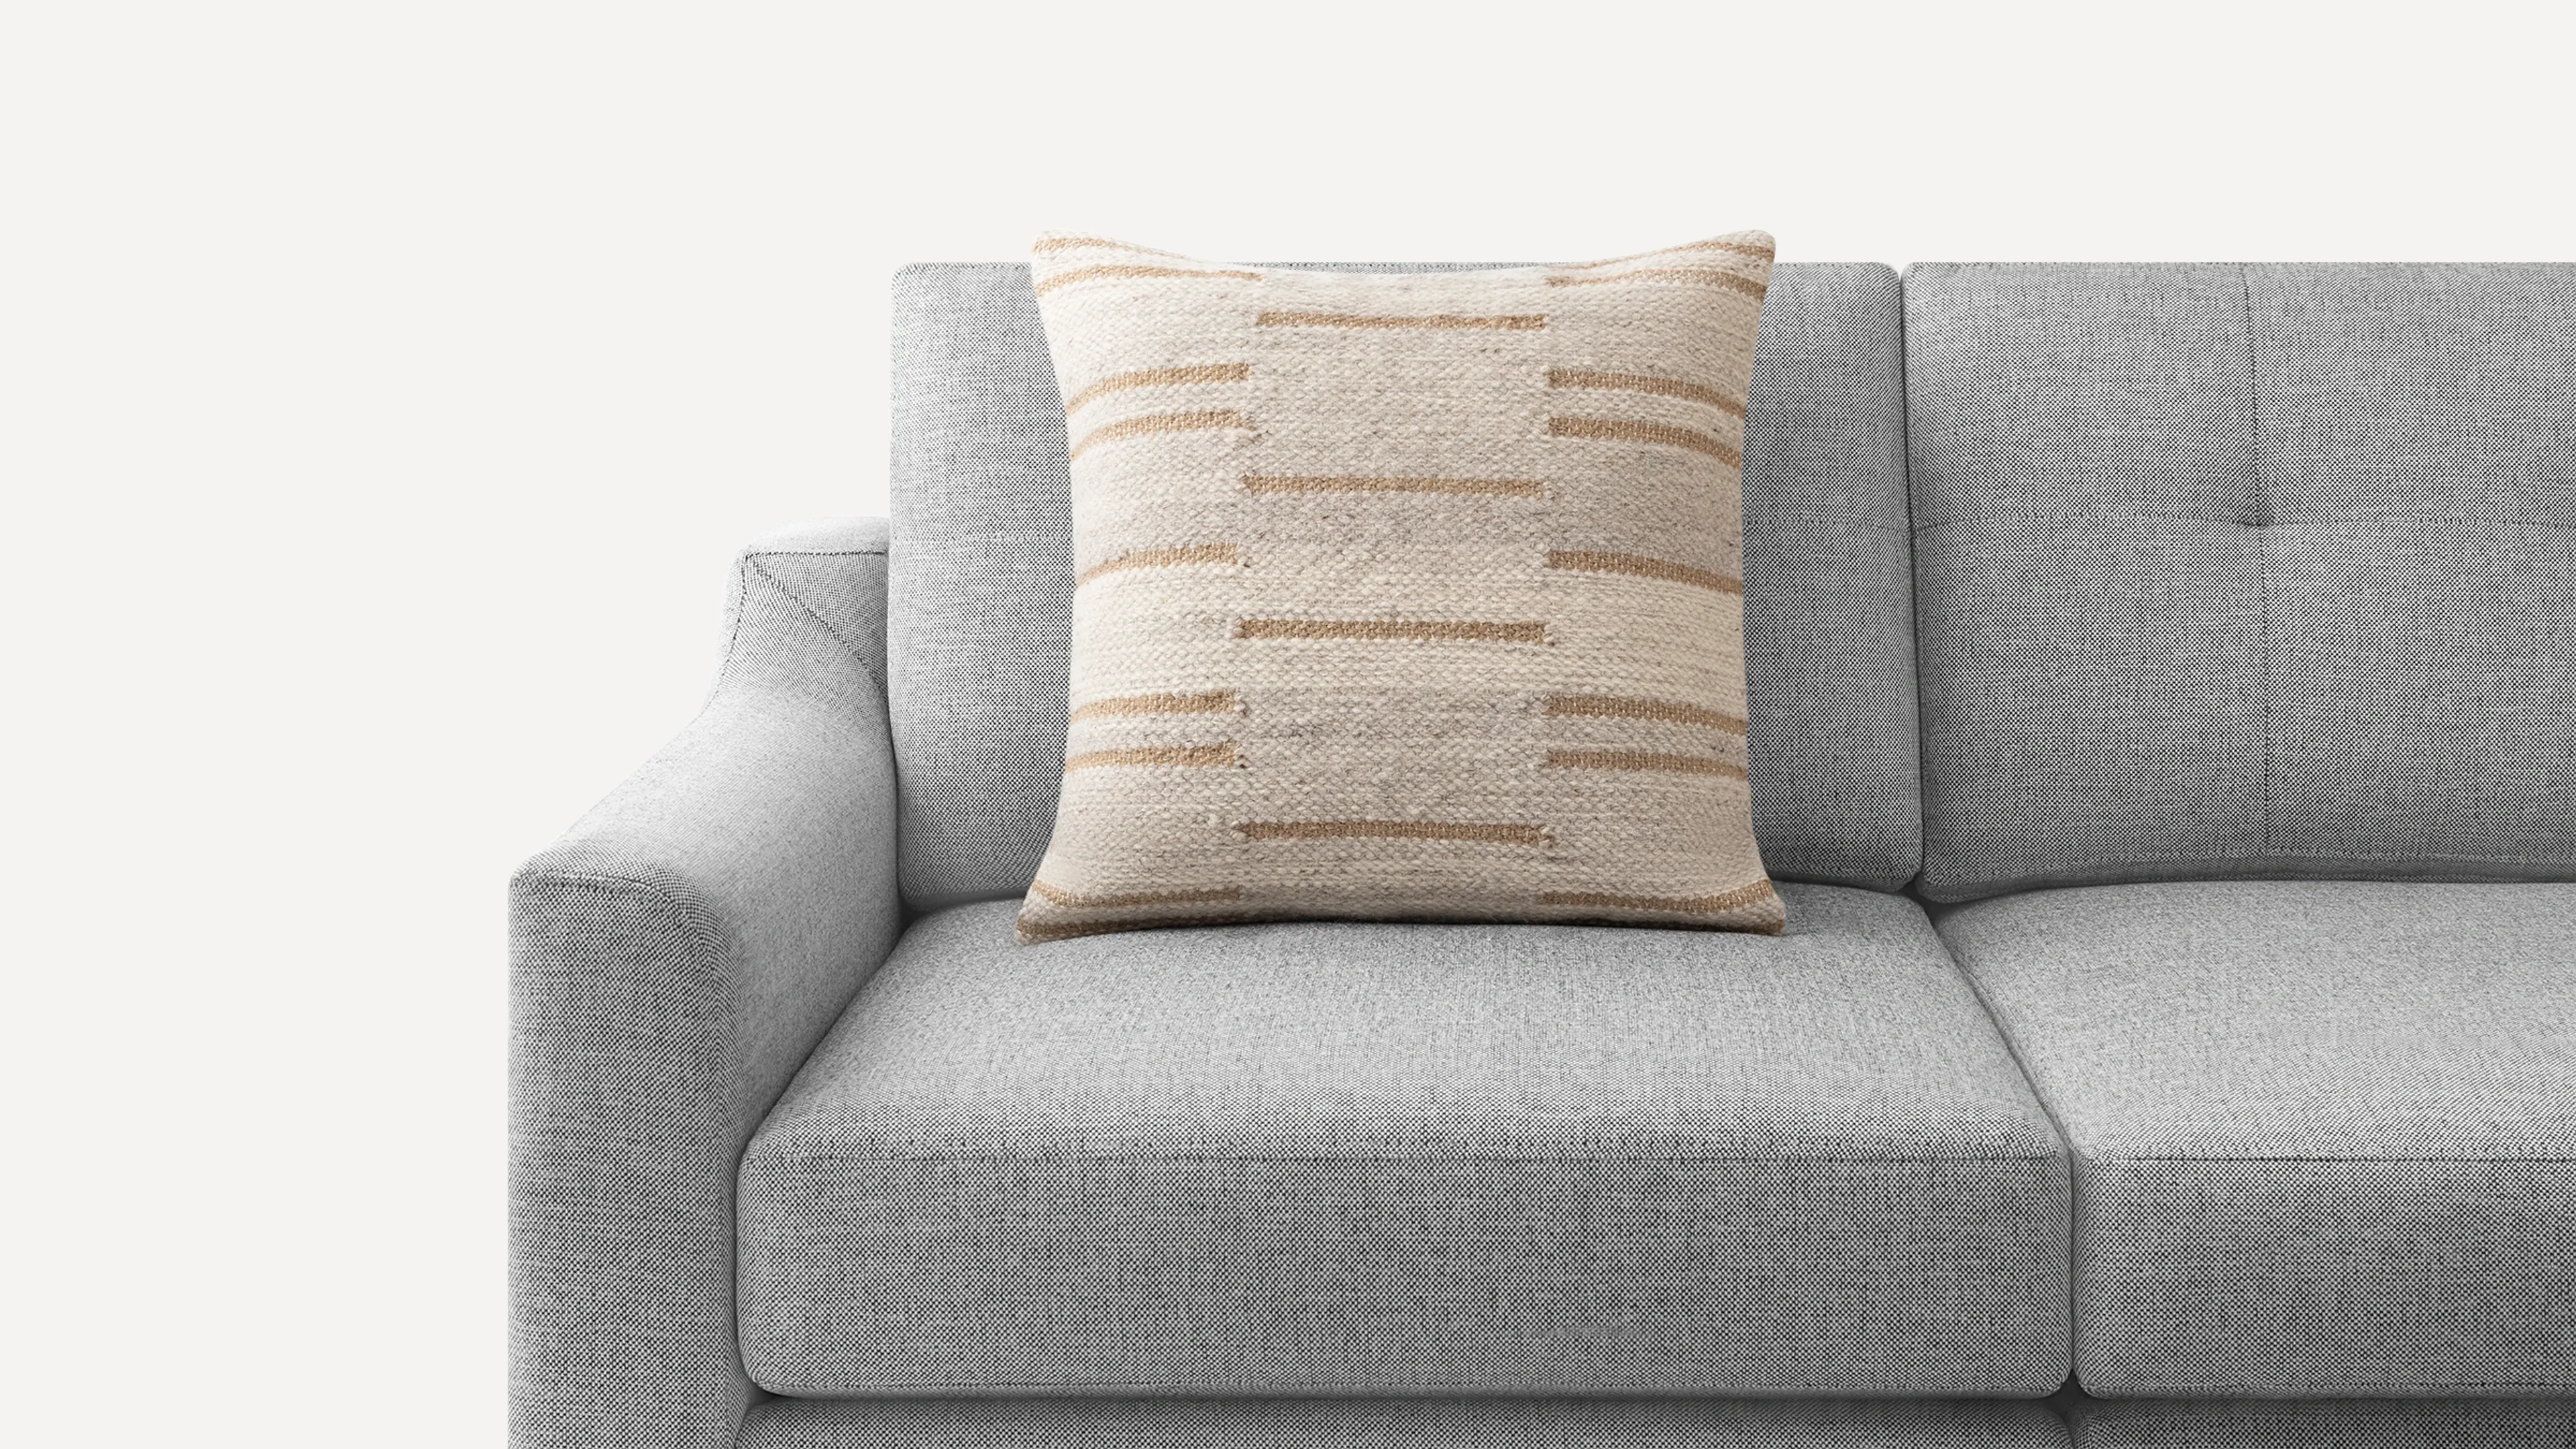 Interval Hand-tufted Pillow Cover